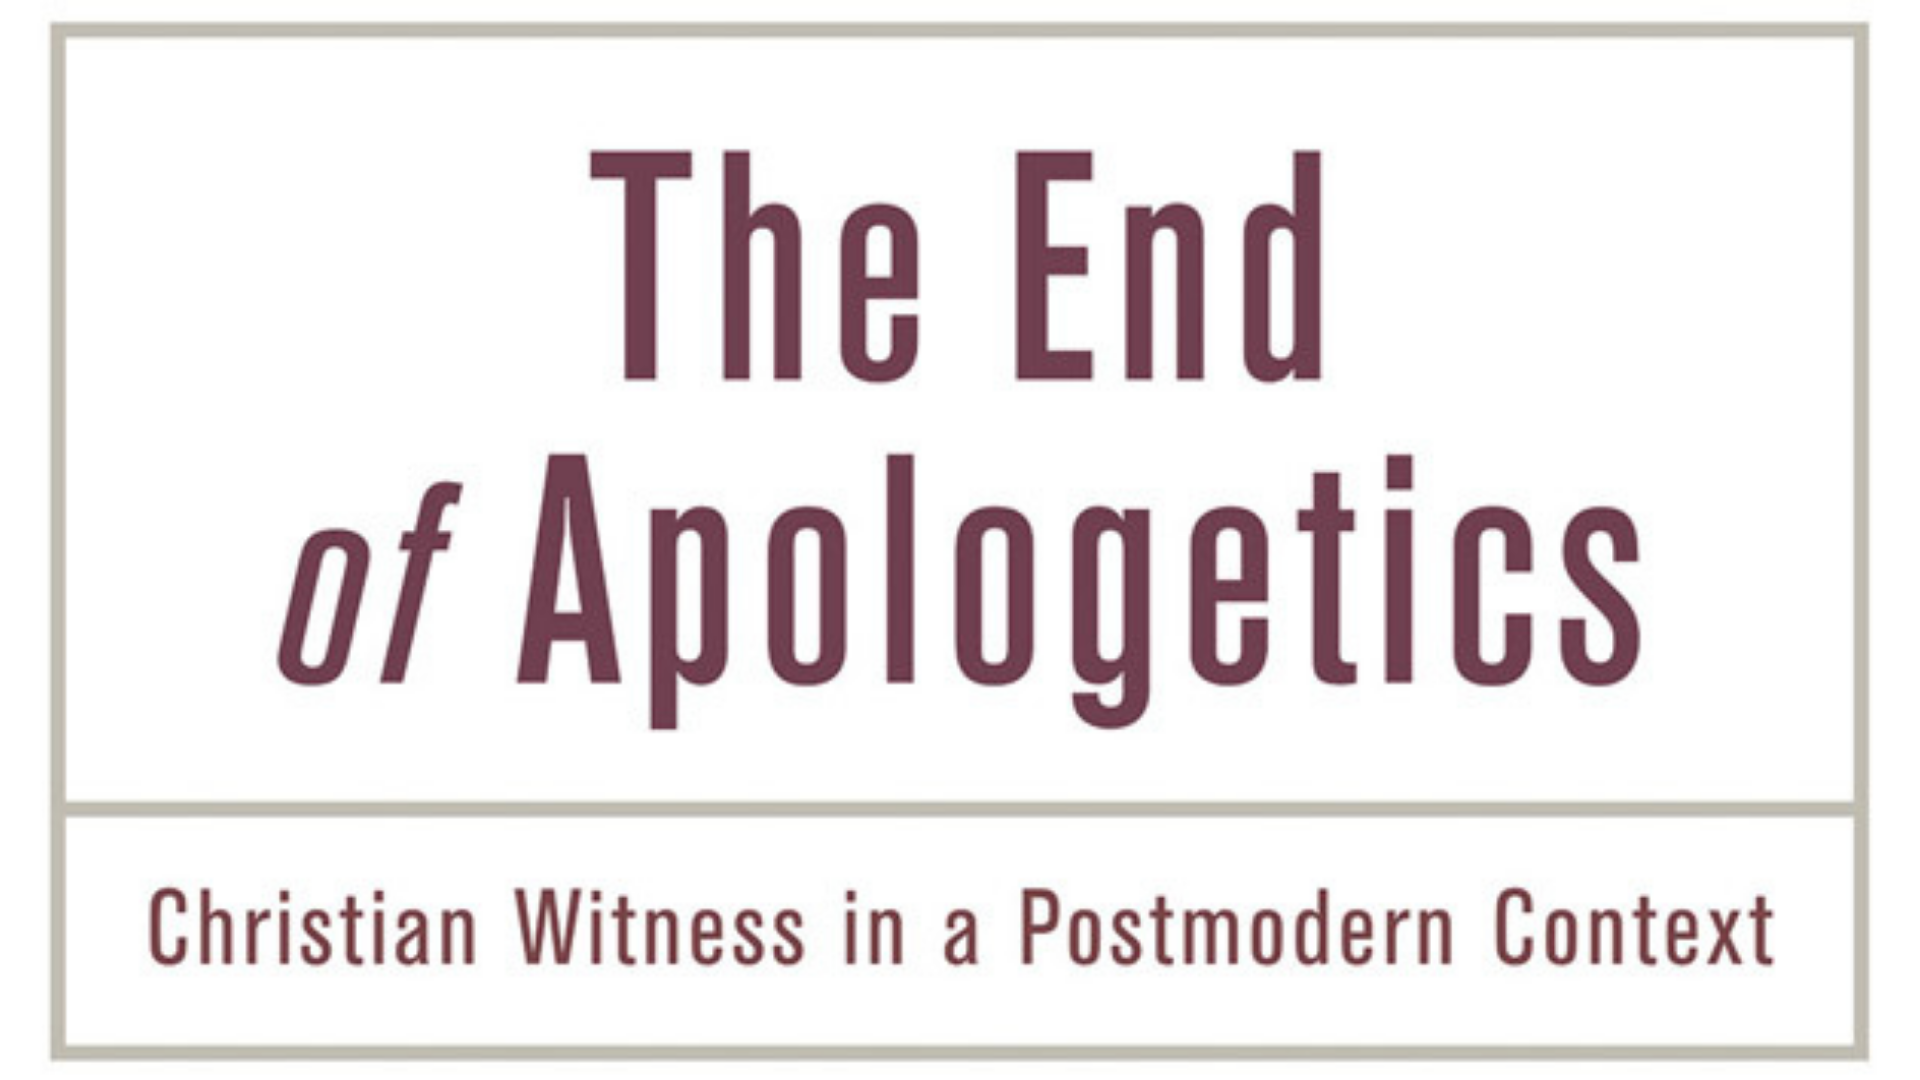 Myron B. Penner,  “The End of Apologetics: Christian Witness in a Postmodern Context,” Grand Rapids, Baker, 2013